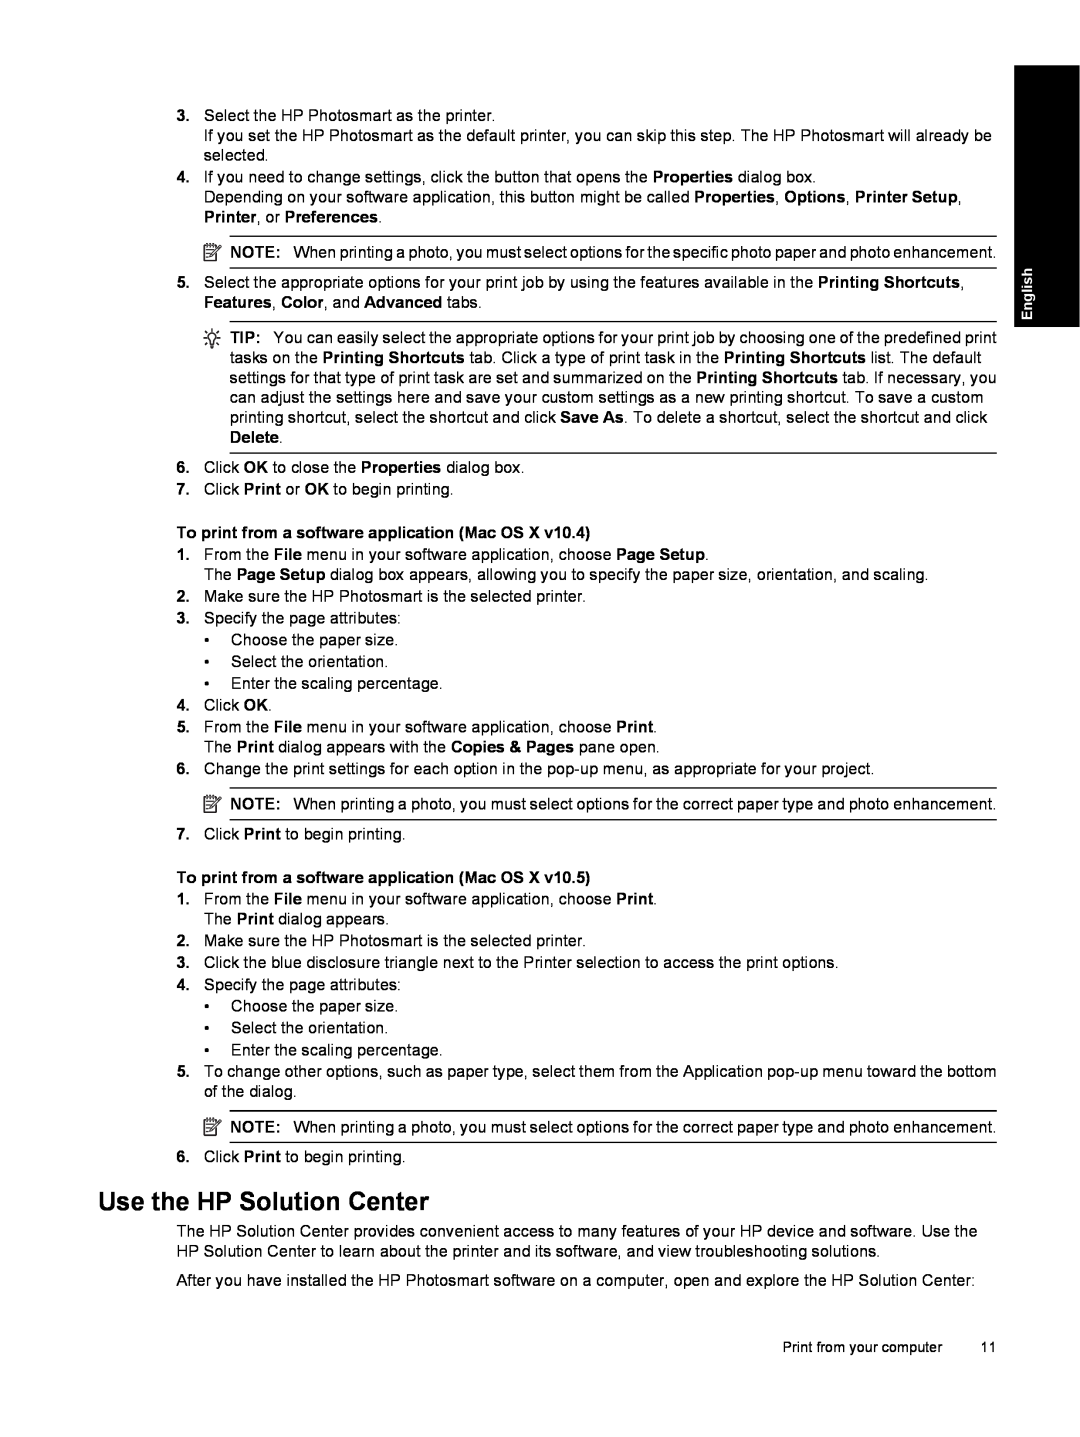 HP B8550 Photo CB981A#B1H manual Use the HP Solution Center, To print from a software application Mac OS X 